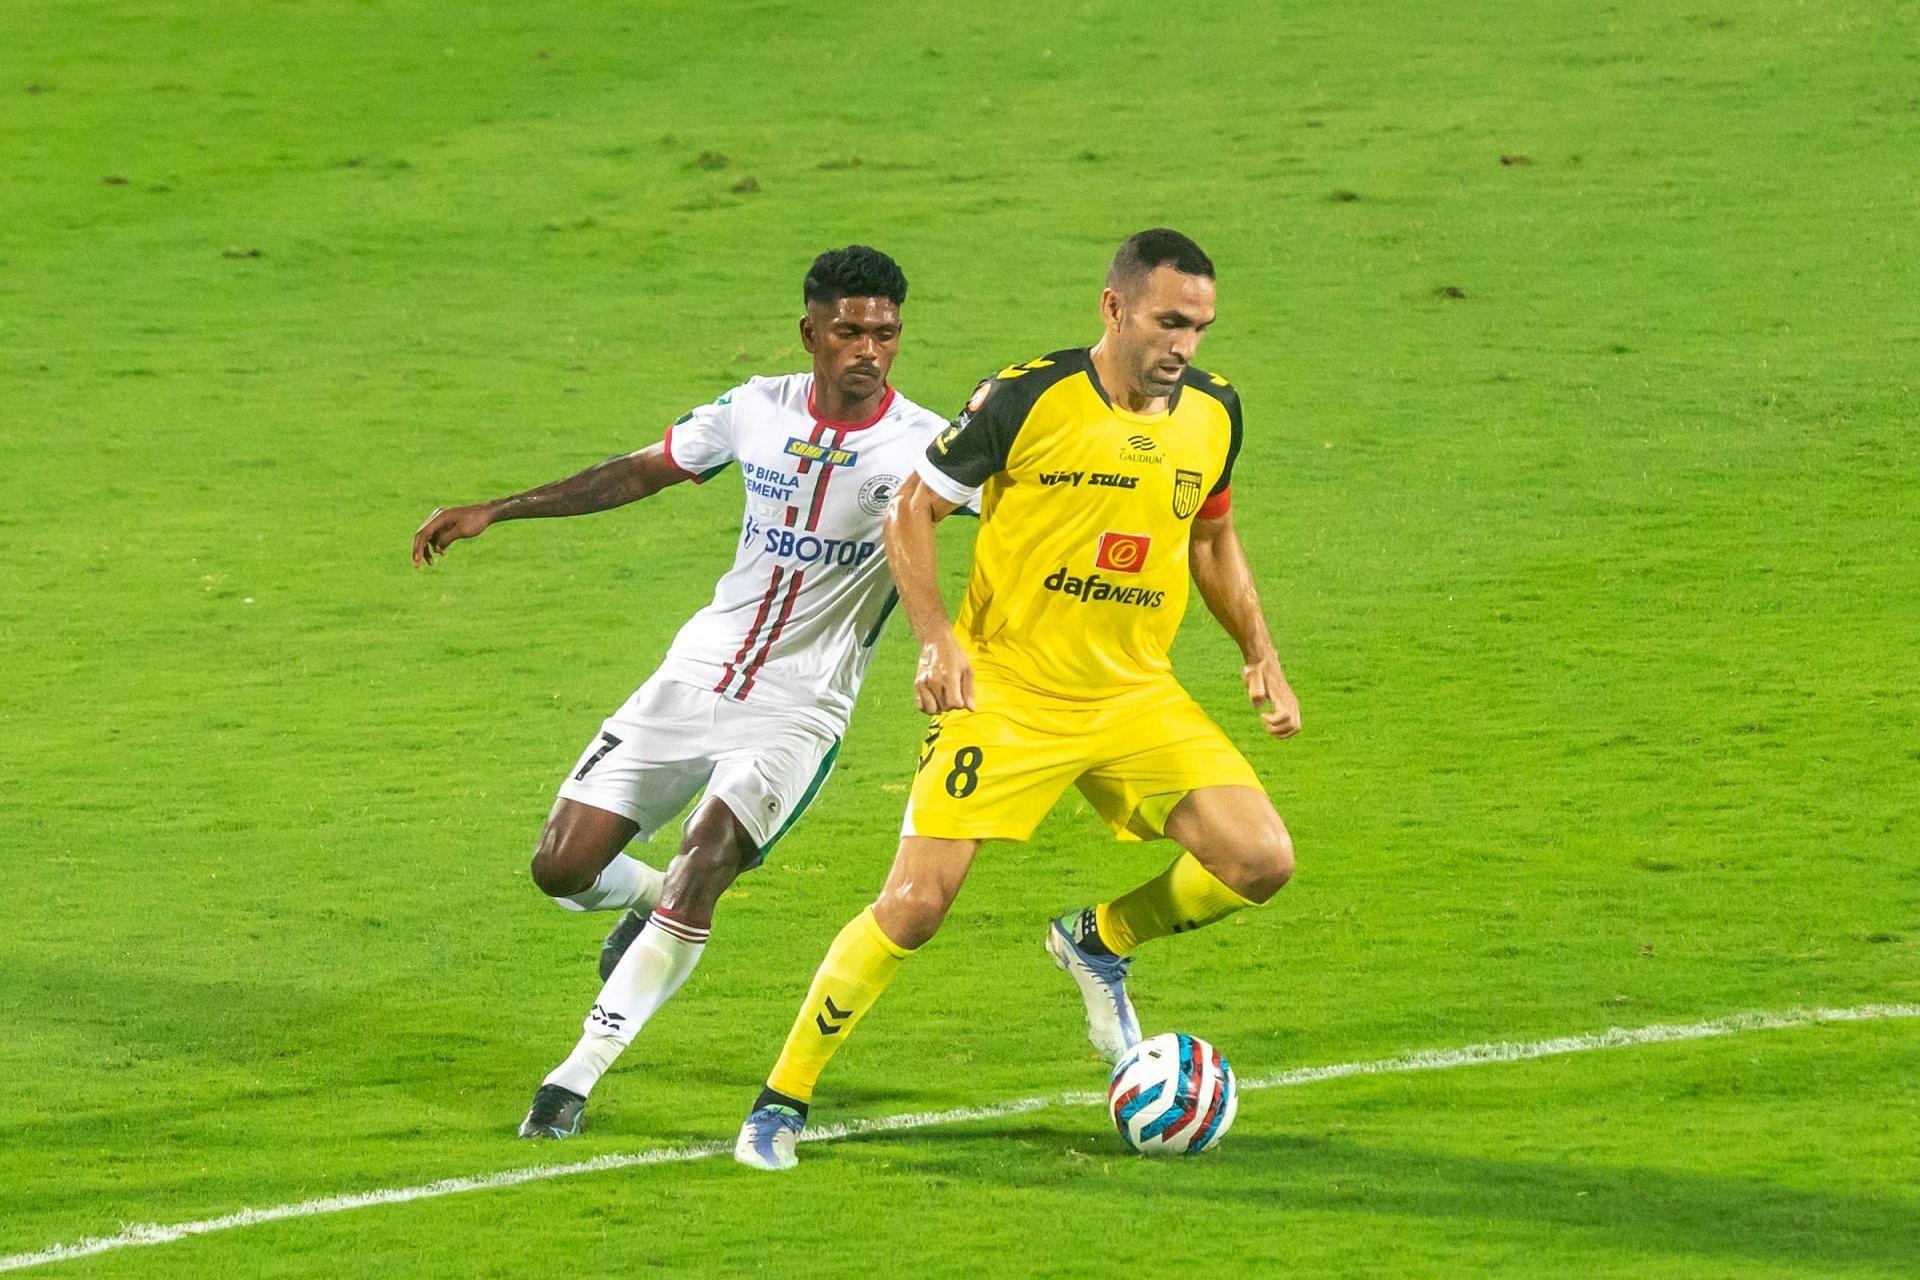 Joao Victor will hope he can keep the lead intact in the second half (Image courtesy: ISL Media)